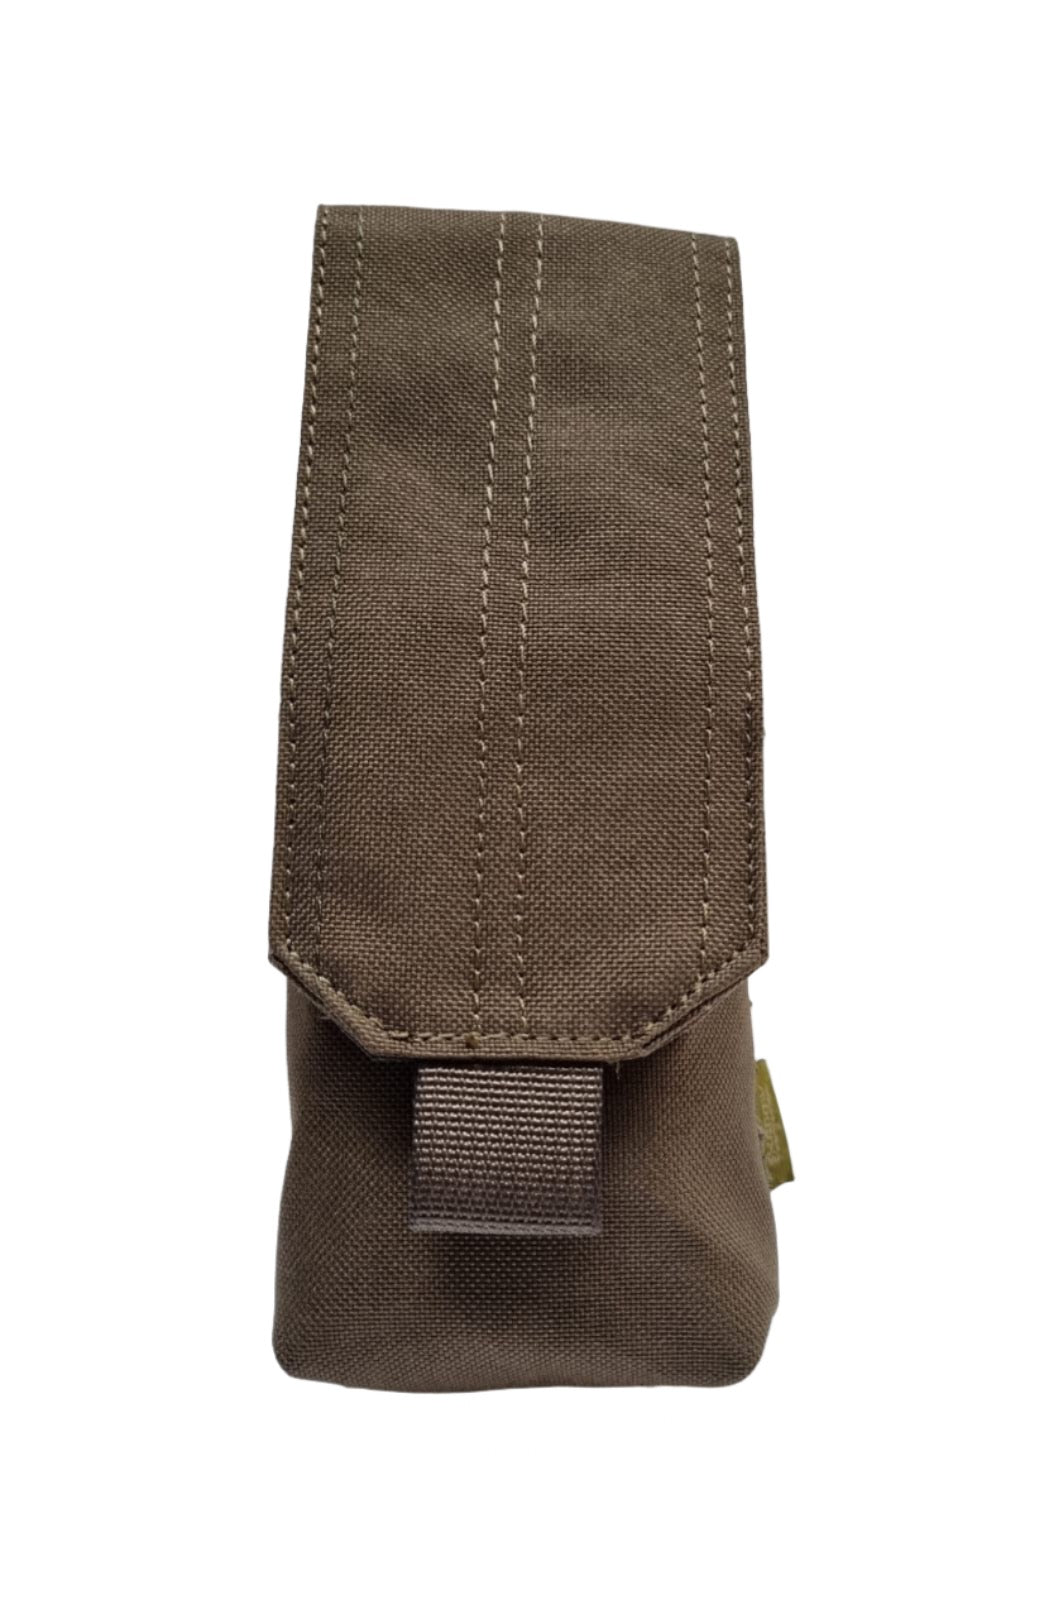 SHE-920 SINGLE M4 5.56MM MAG POUCH COLOR ARMY GREEN